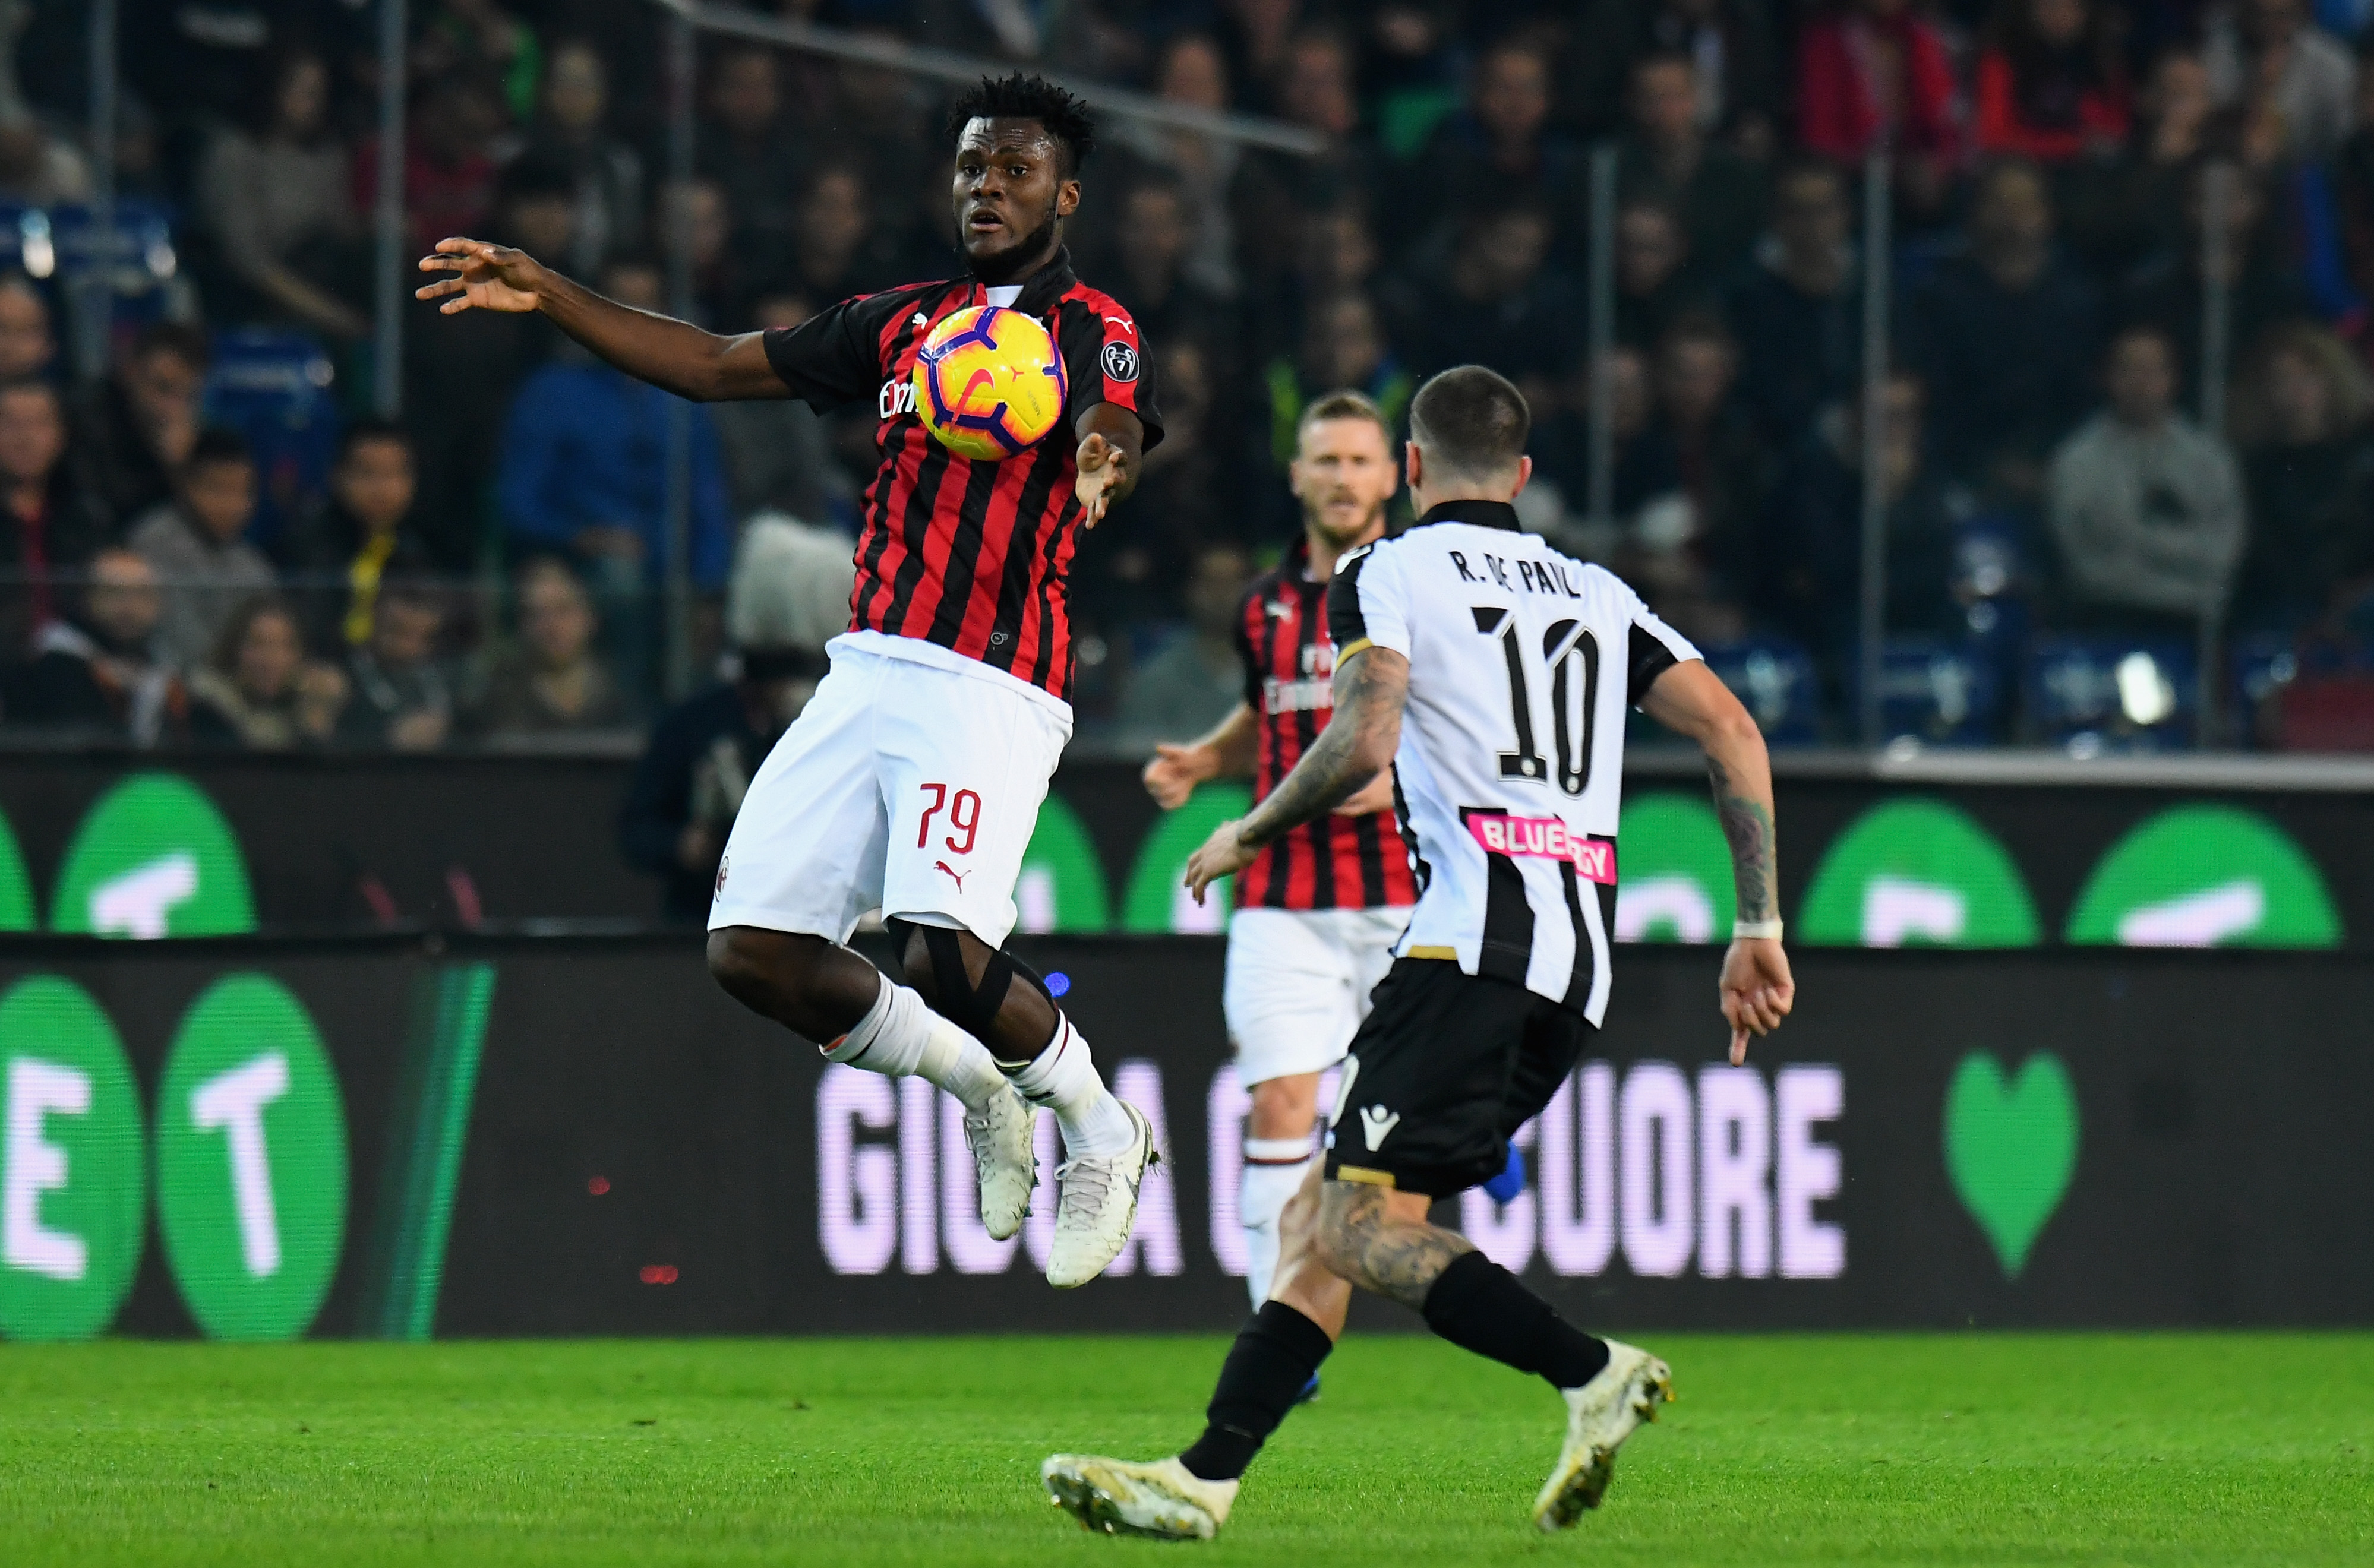 UDINE, ITALY - NOVEMBER 04: Frank Kessie of AC Milan controls the ball during the Serie A match between Udinese and AC Milan at Stadio Friuli on November 4, 2018 in Udine, Italy. (Photo by Alessandro Sabattini/Getty Images)